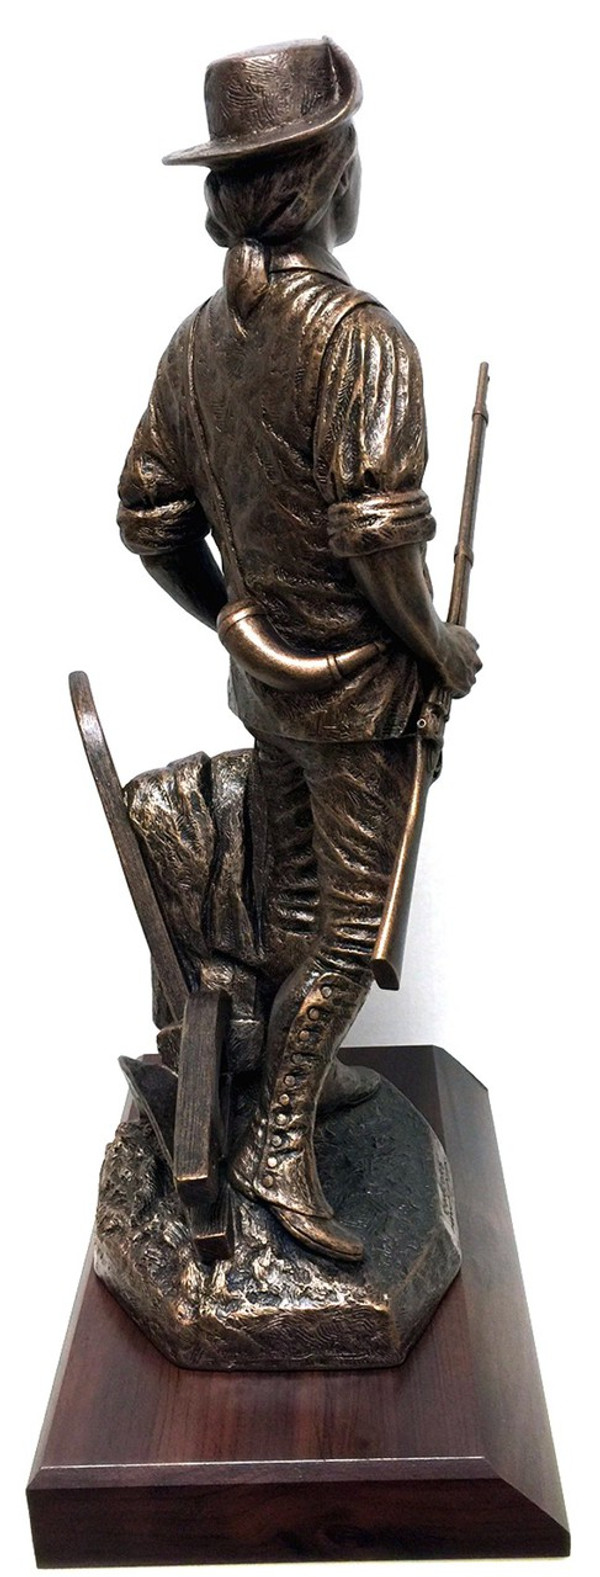 Awesome 19" Total Height Highly Detailed "CONCORD" National Guard Minuteman Military Statue Mounted on a 7"W x 11"L x 1-1/2"H Genuine Redwood Base.